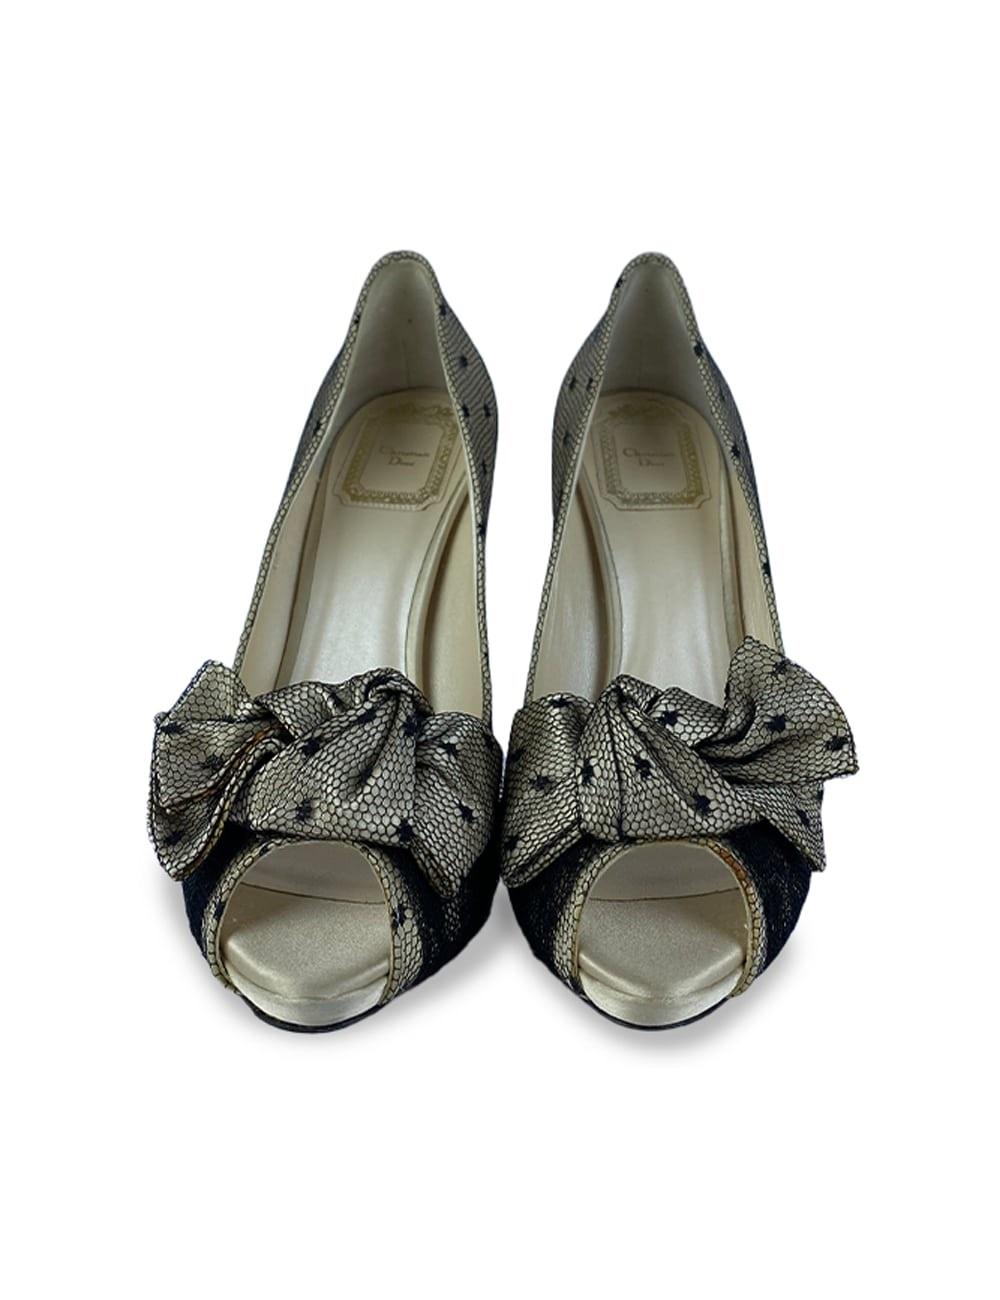 Christian Dior Bow Peep Toe Lace Pumps.

Additional information:
Material: Tulle Lace 
Size: EU 37.5
Heel length: 12 cm
Platform: 3 cm
Overall Condition: Good
Interior Condition: signs of use
Exterior Condition: some orange stains on the bows.